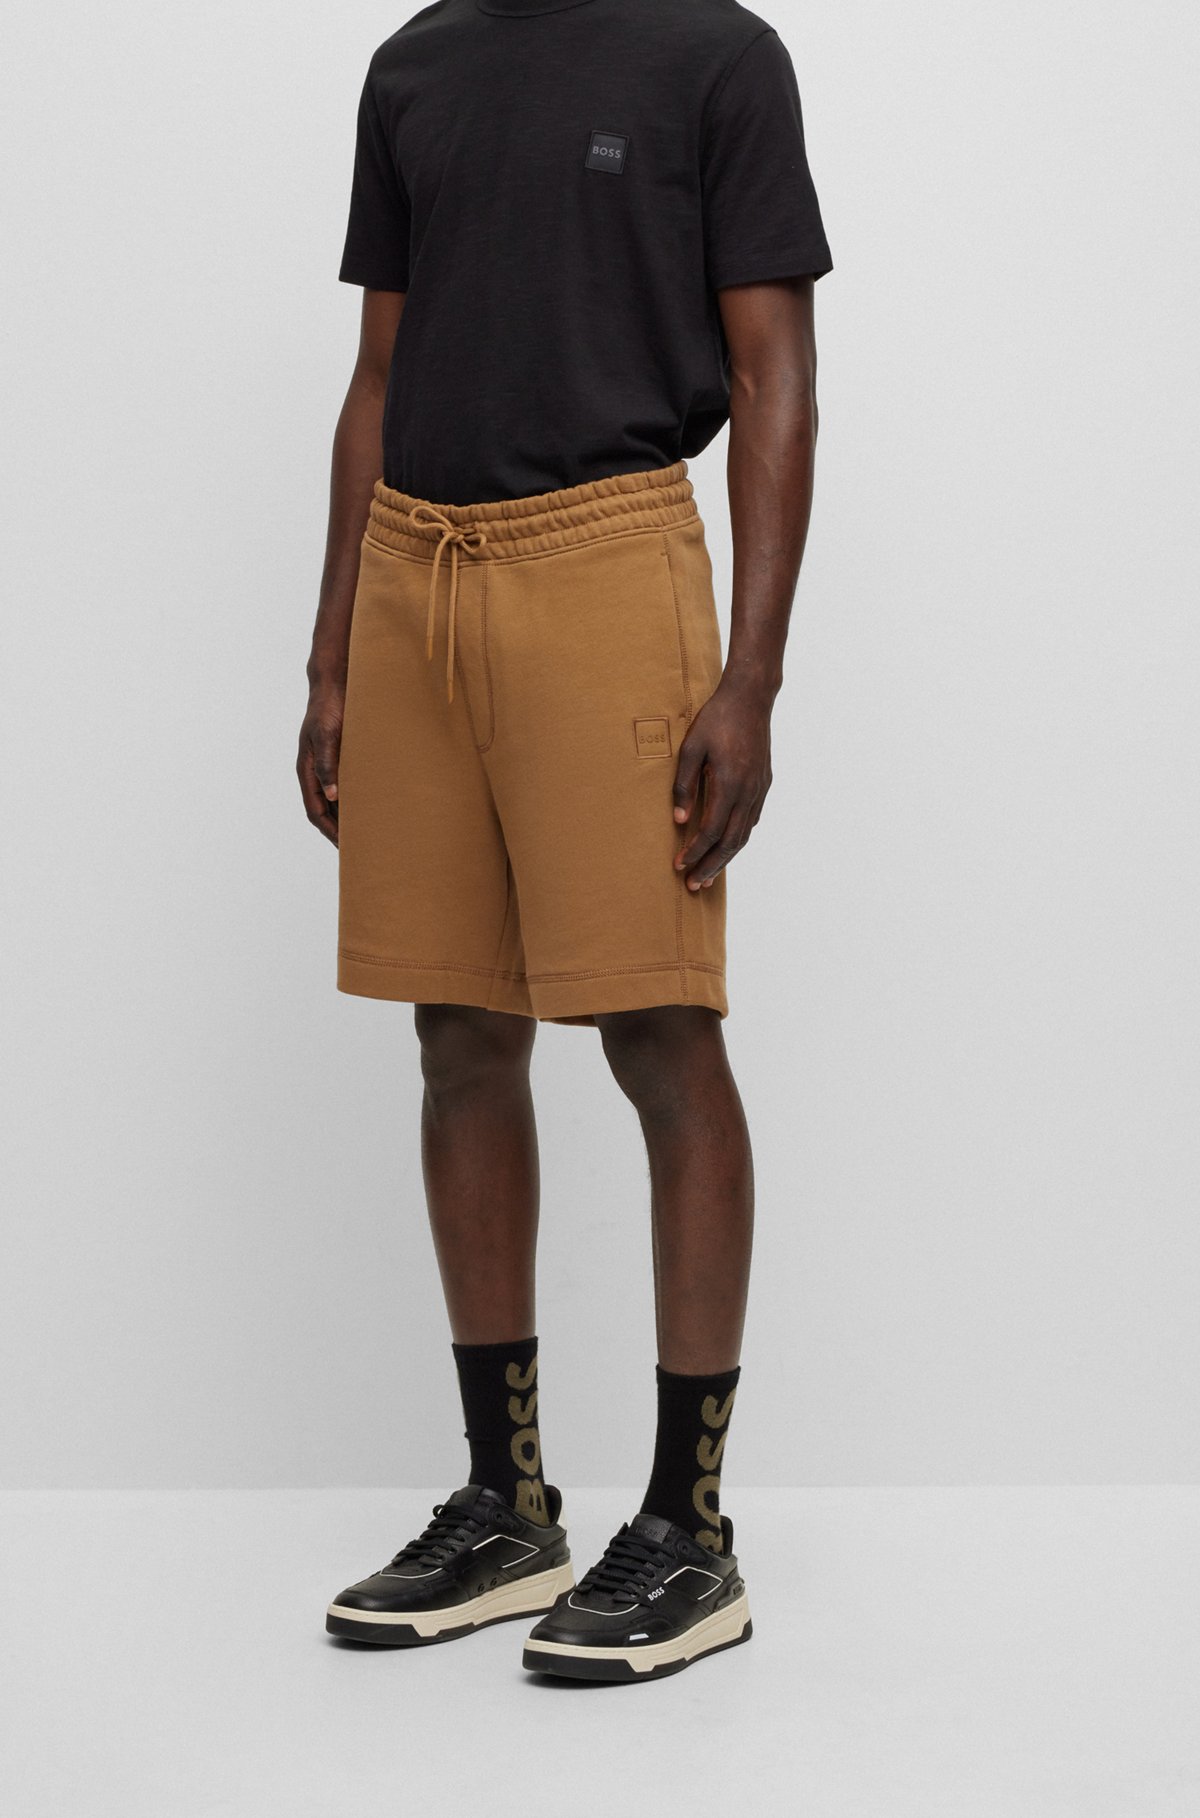 Drawstring shorts in French terry cotton with logo patch, Brown